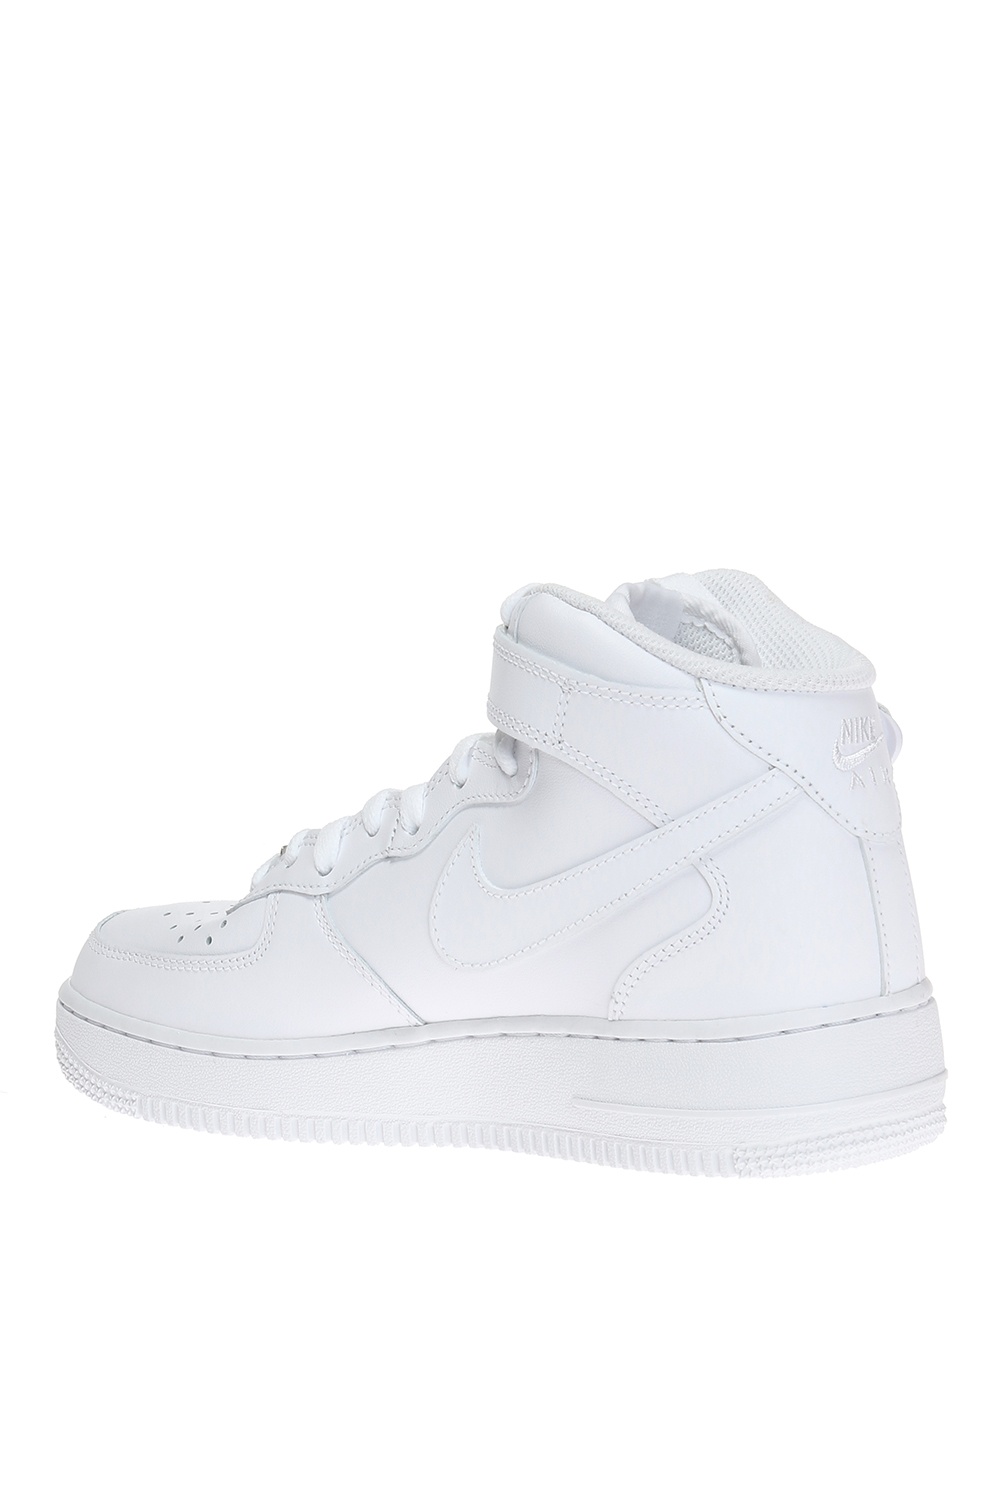 nike air force 1 mid all white